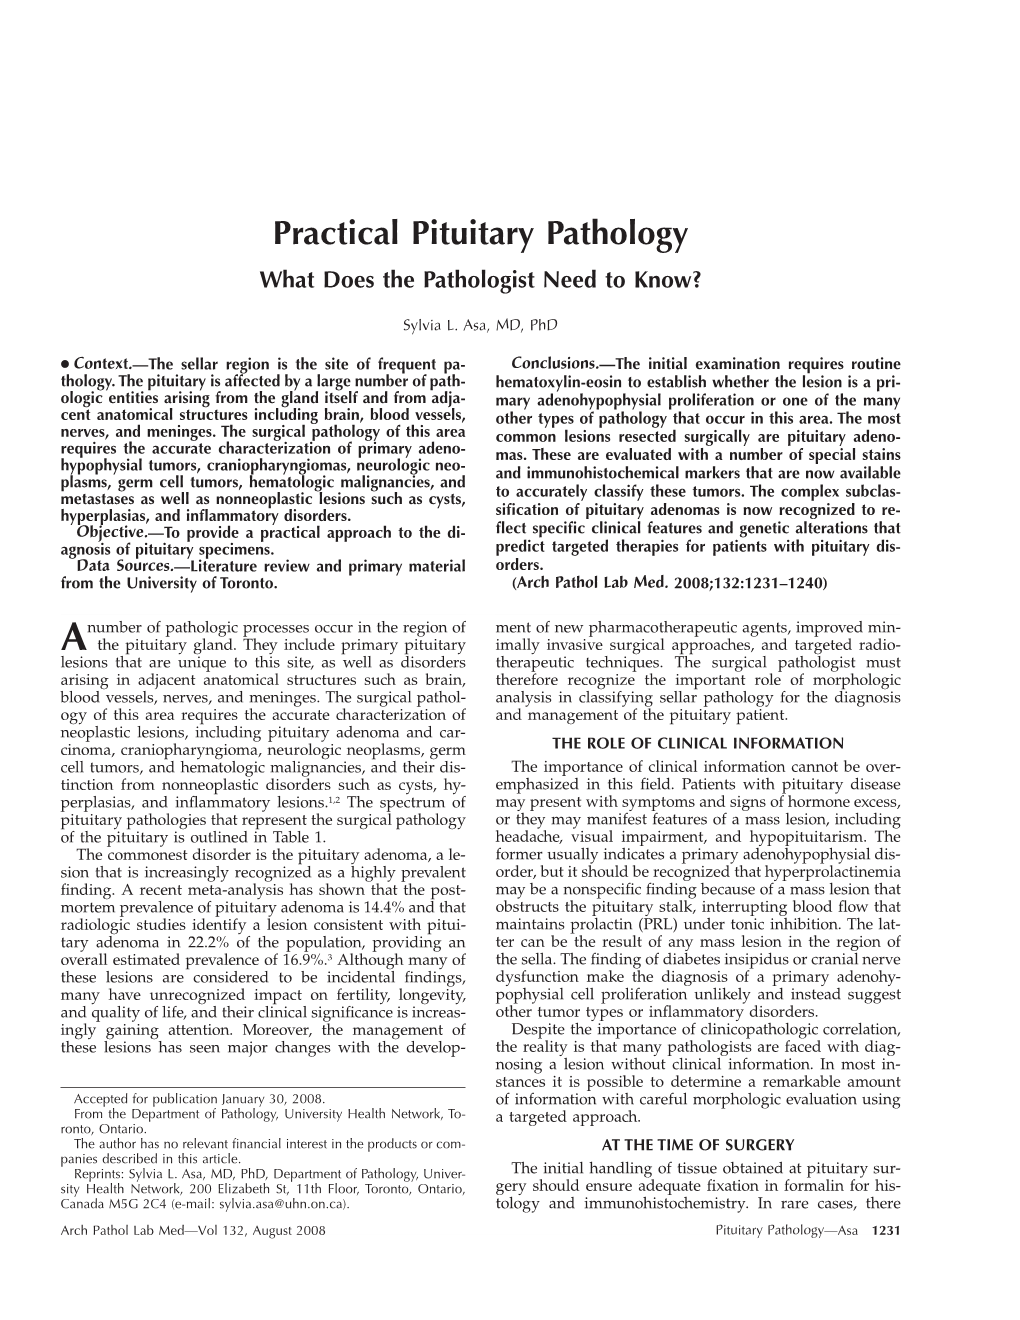 Practical Pituitary Pathology What Does the Pathologist Need to Know?